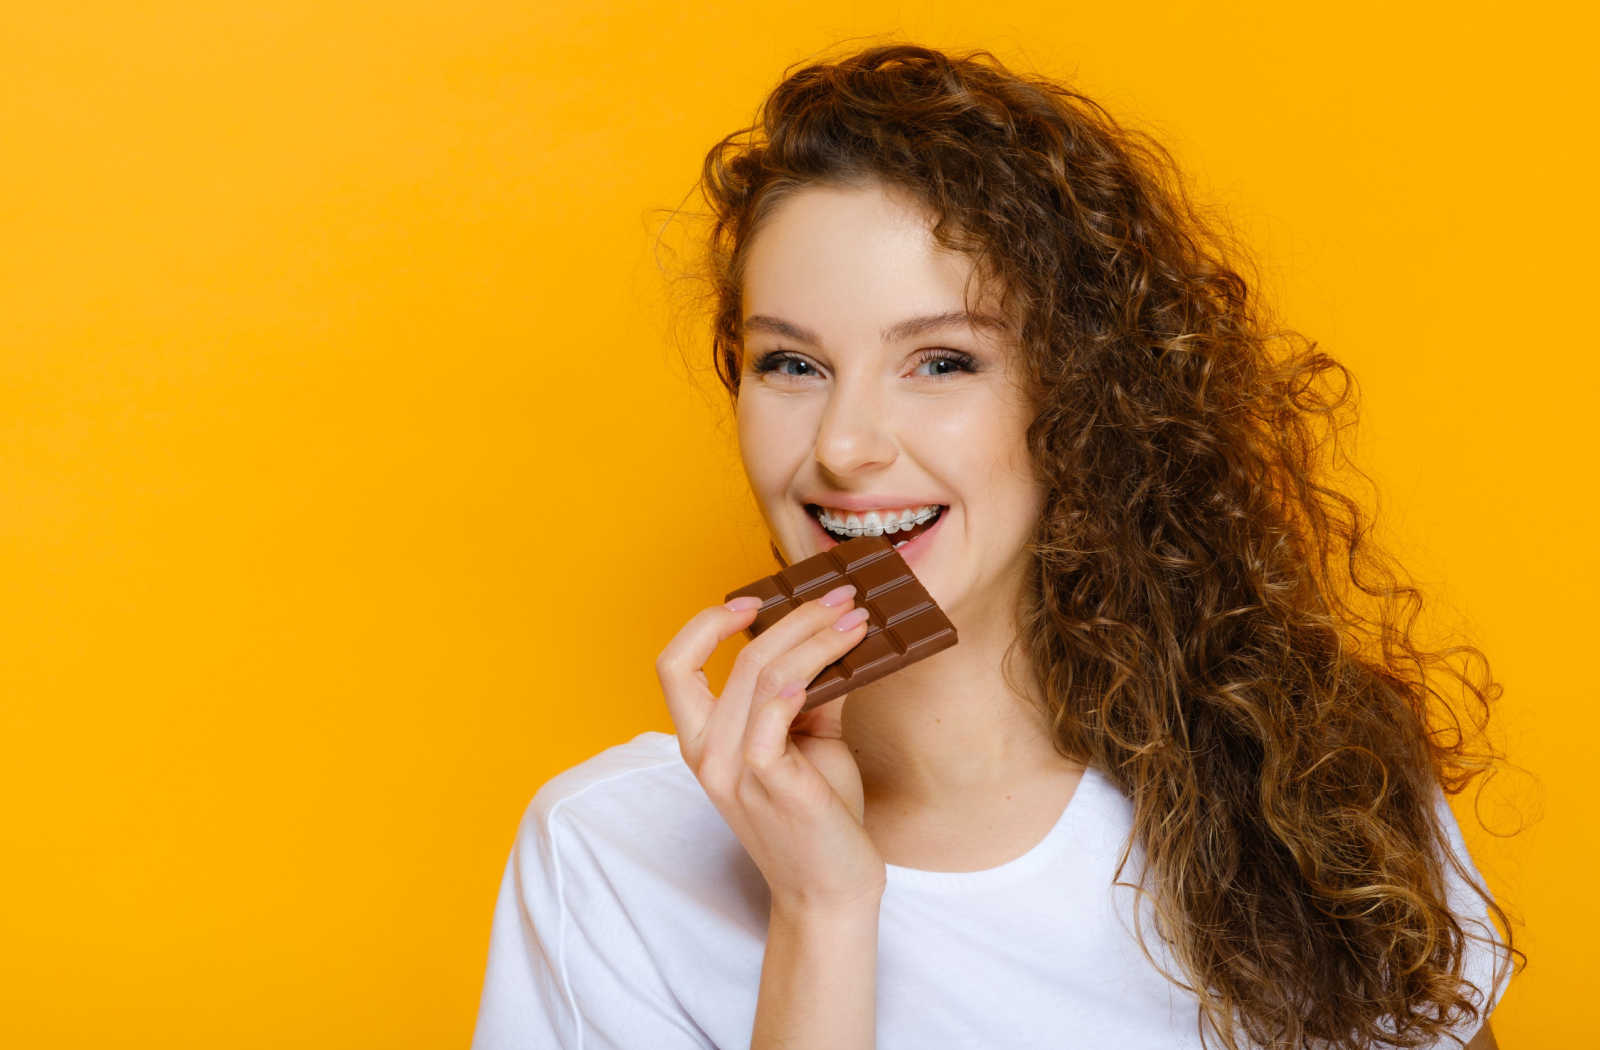 how-to-eat-sticky-things-with-braces